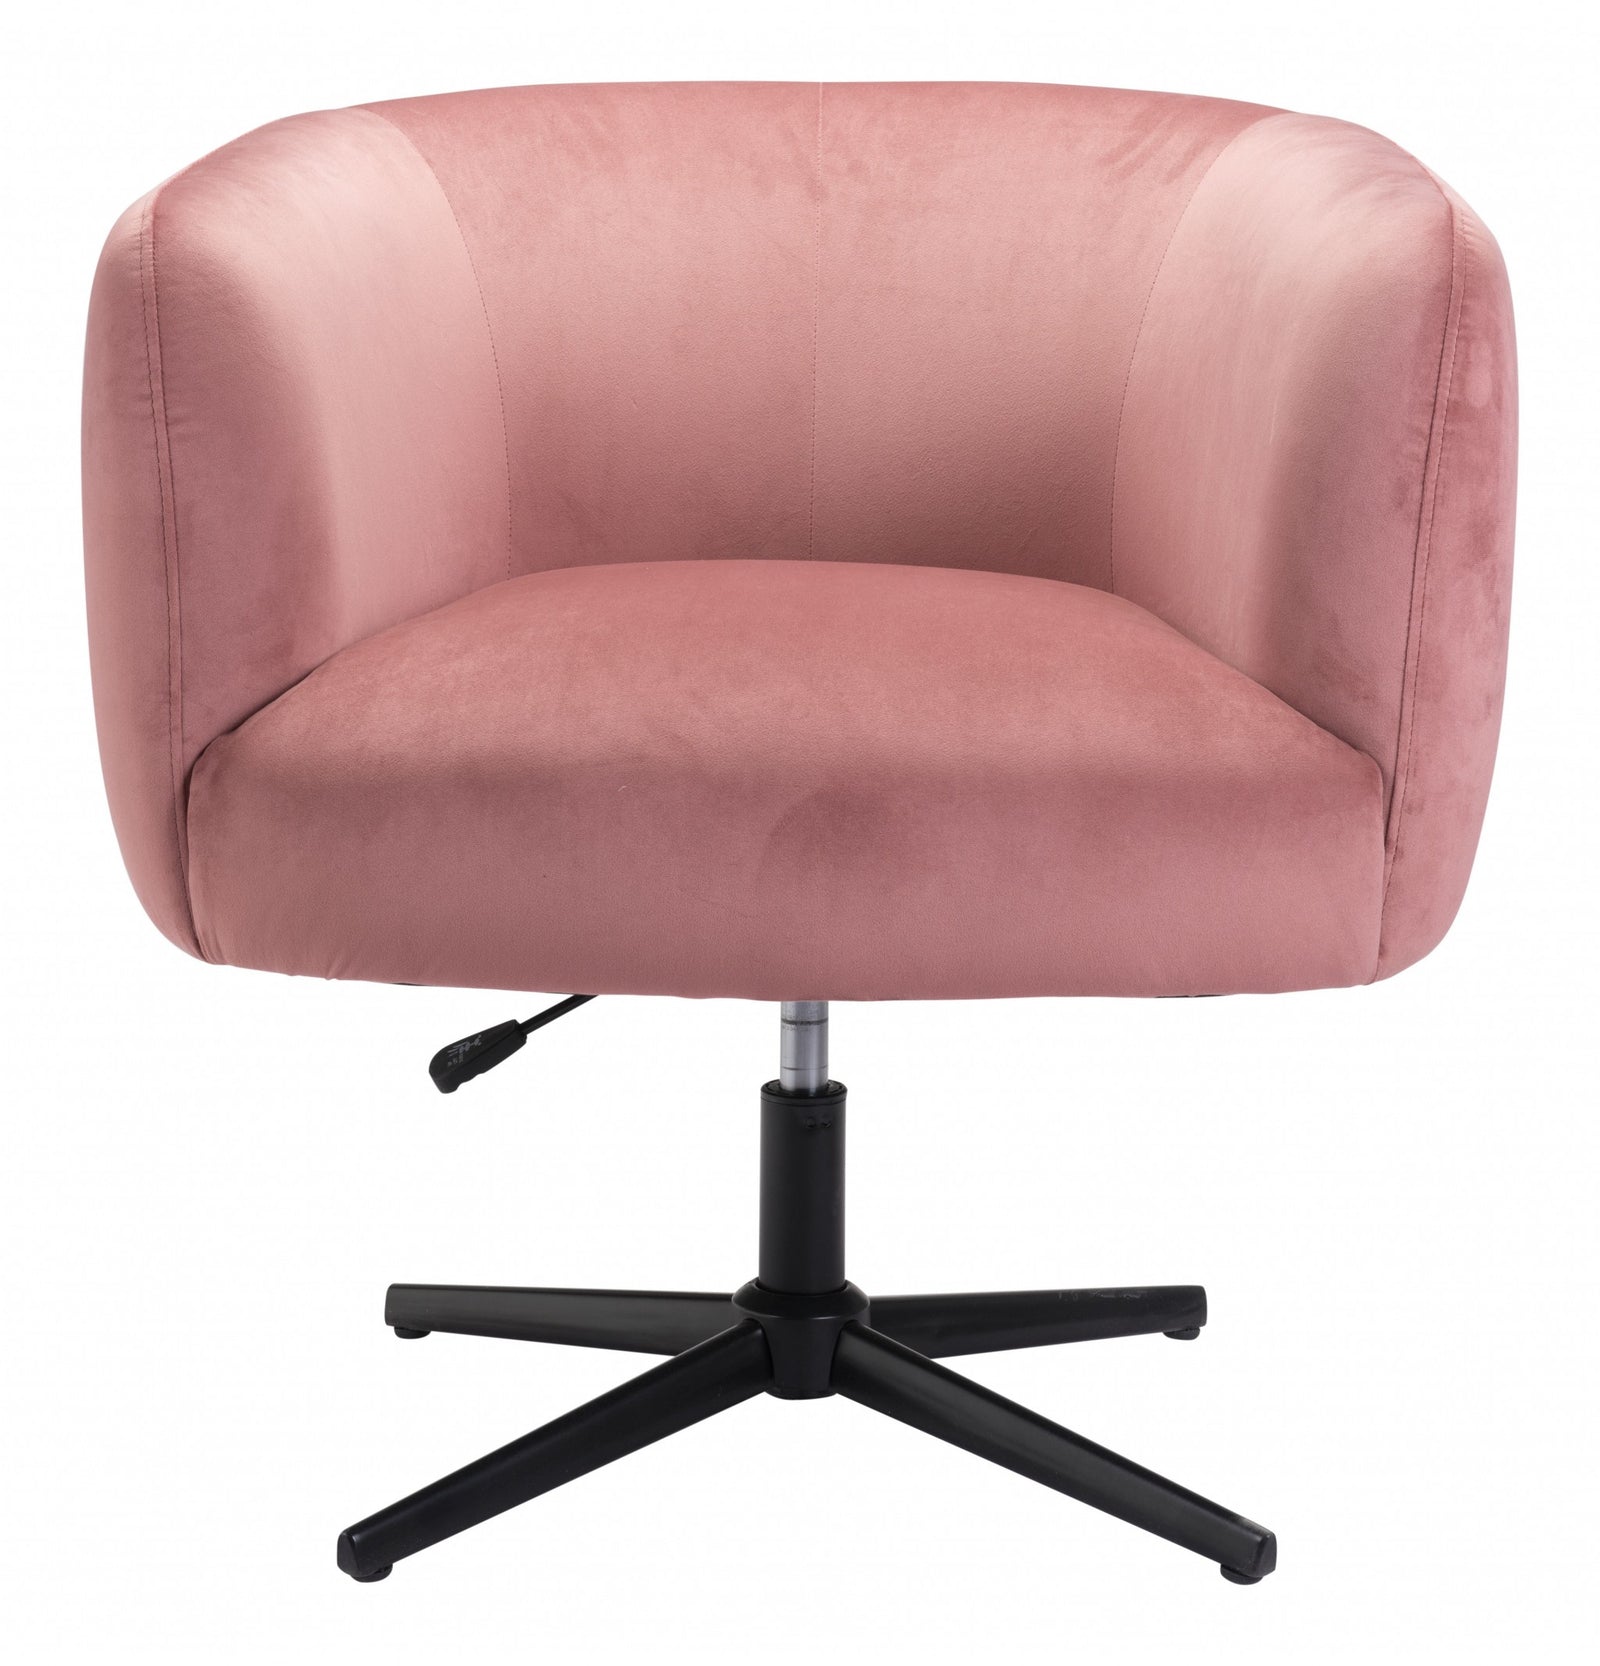 Gusto Glam Pink and Black Swivel Accent Chair